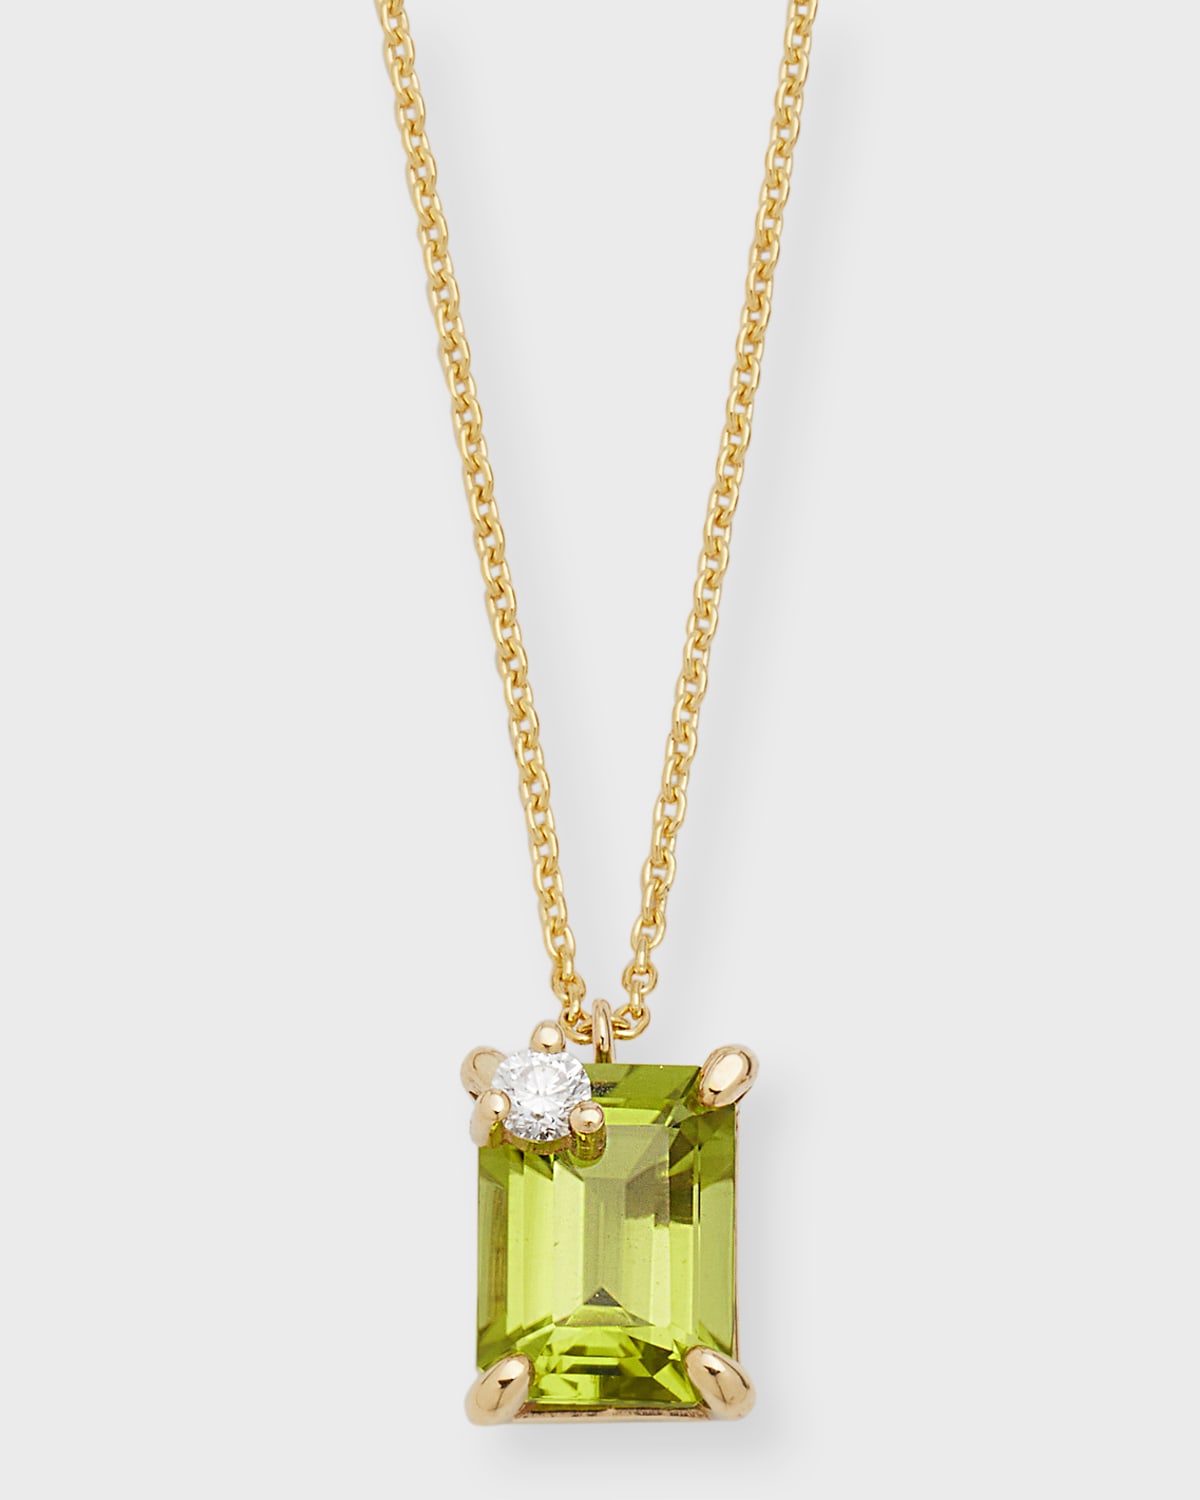 Emerald-Cut Peridot Pendant Necklace with Diamond and Pearl